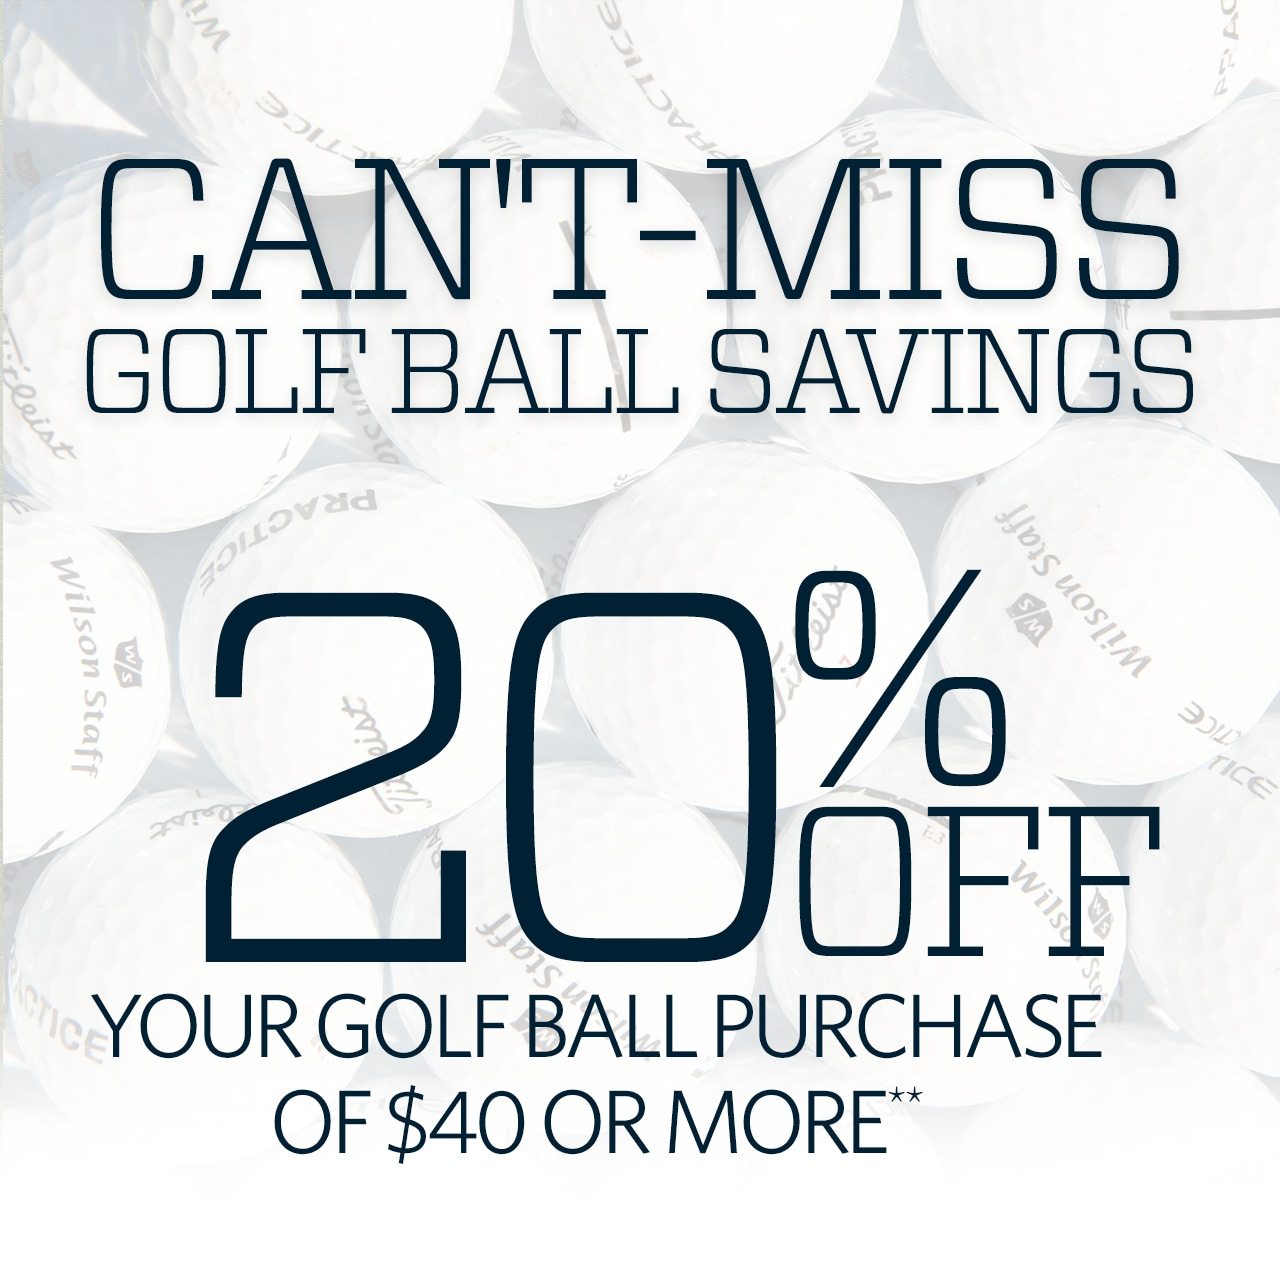 Can’t-Miss Golf Ball Savings. 20% Off Your Golf Ball Purchase of $40 or More**